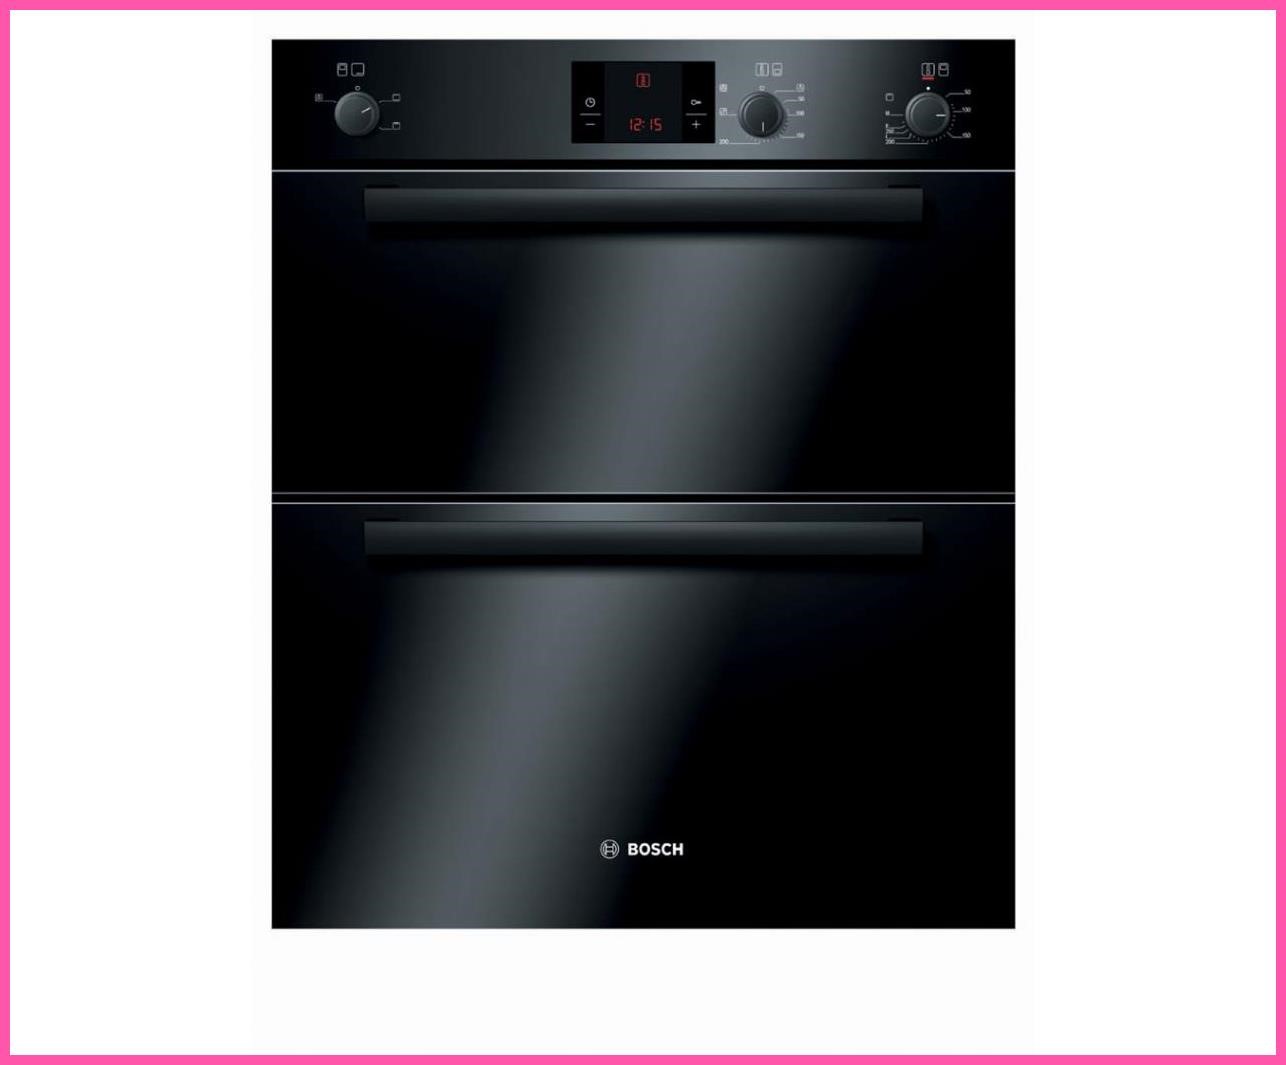 6 Boots Kitchen Appliances Promotional Code Free Delivery Kitchen Appliances I Cookers Ovens Washing Machines Freezers  Boots,Kitchen,Appliances,Promotional,Code,Free,Delivery